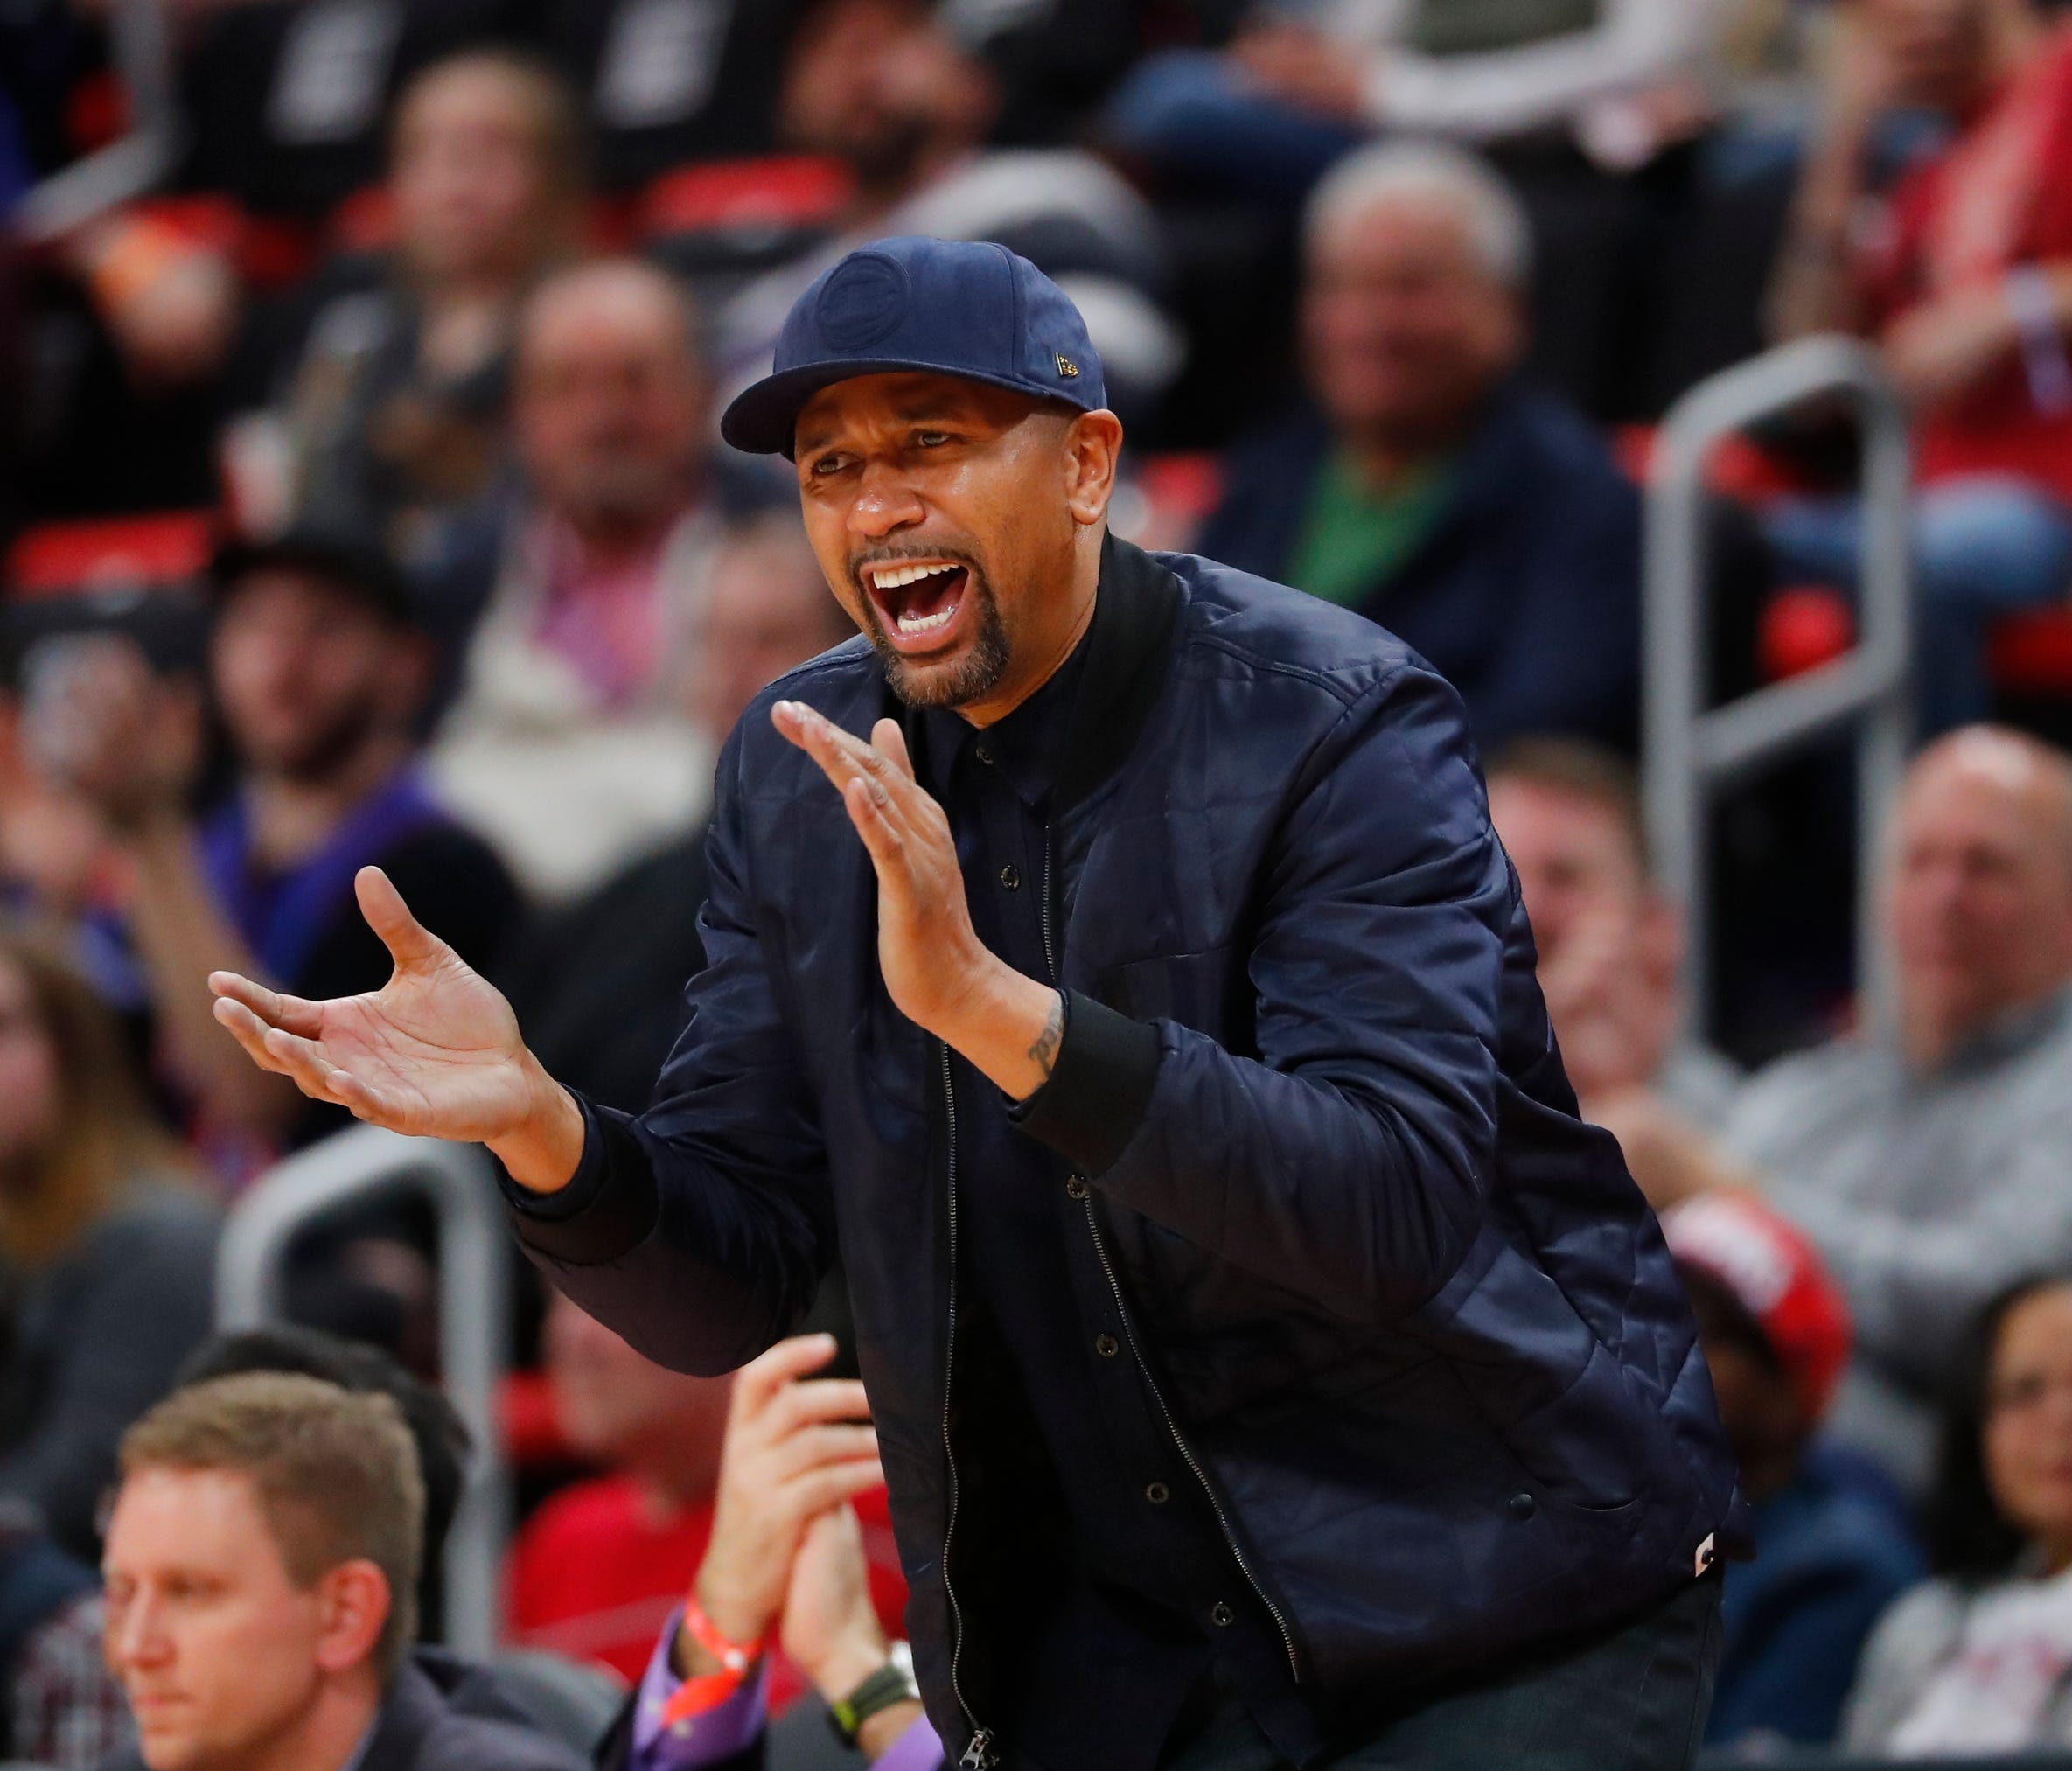 Jalen Rose cheers in the second half of an NBA basketball game between the Detroit Pistons and New Orleans Pelicans in Detroit, Monday, Feb. 12, 2018.